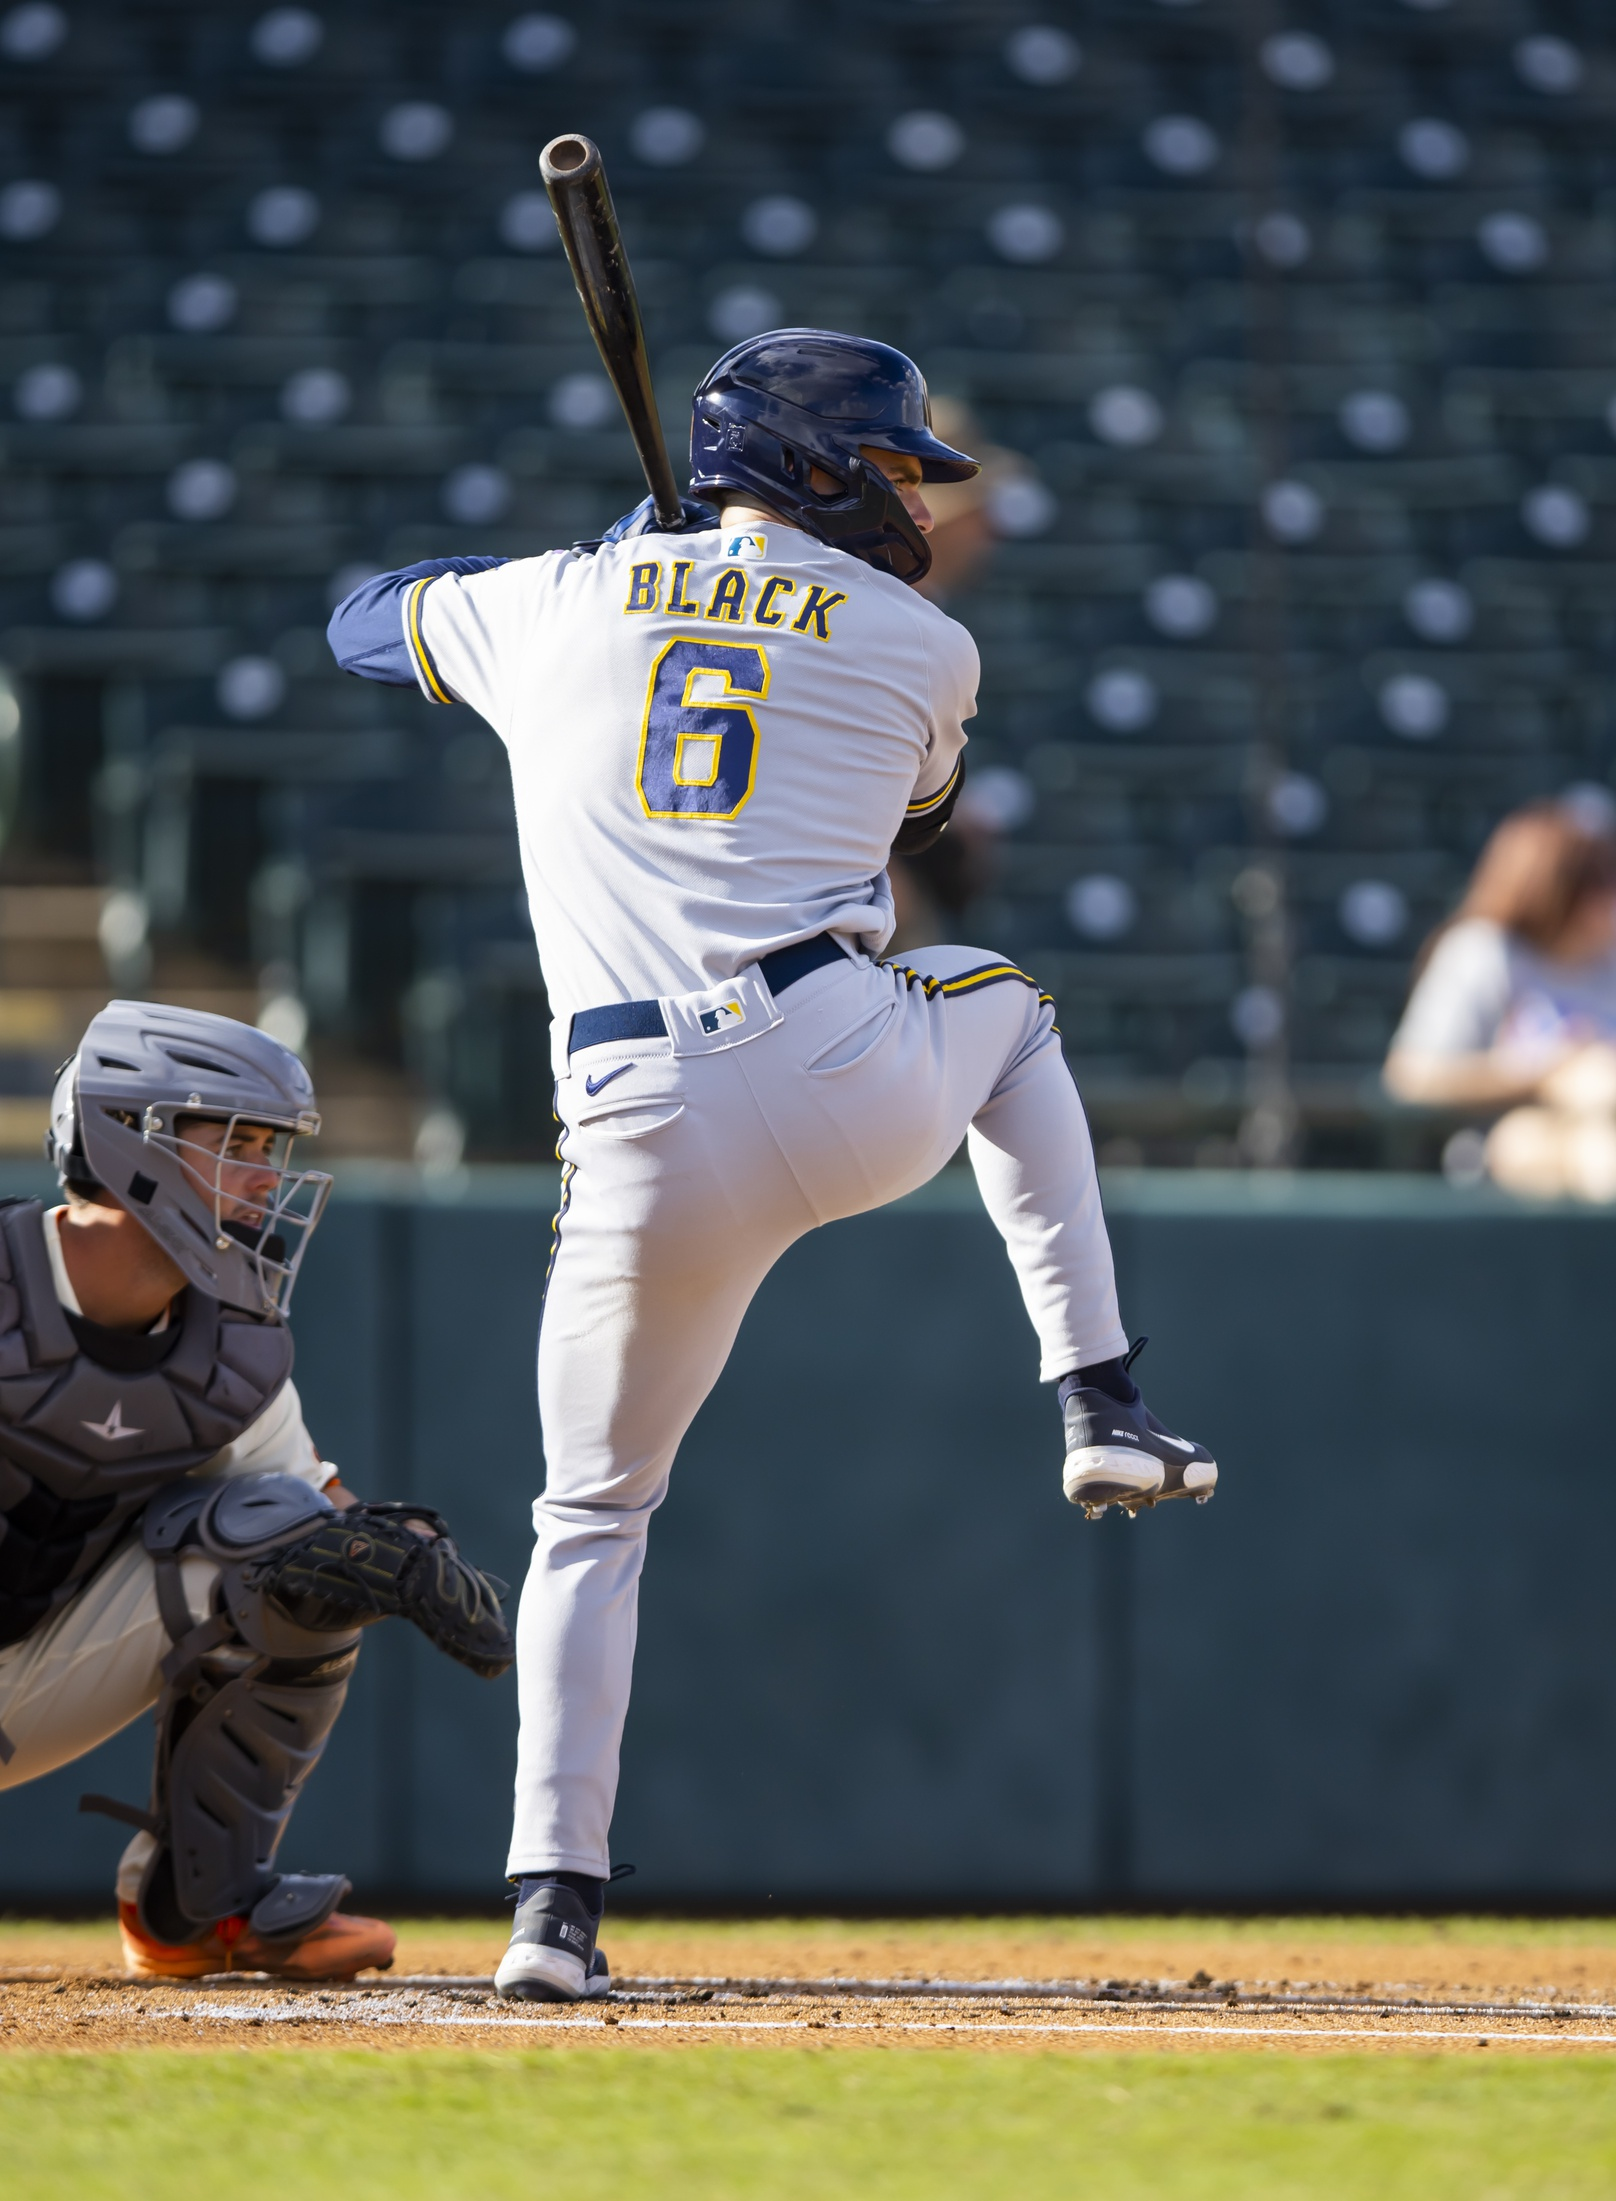 Sam Dykstra On Brewers Prospects Who Could Make The Team